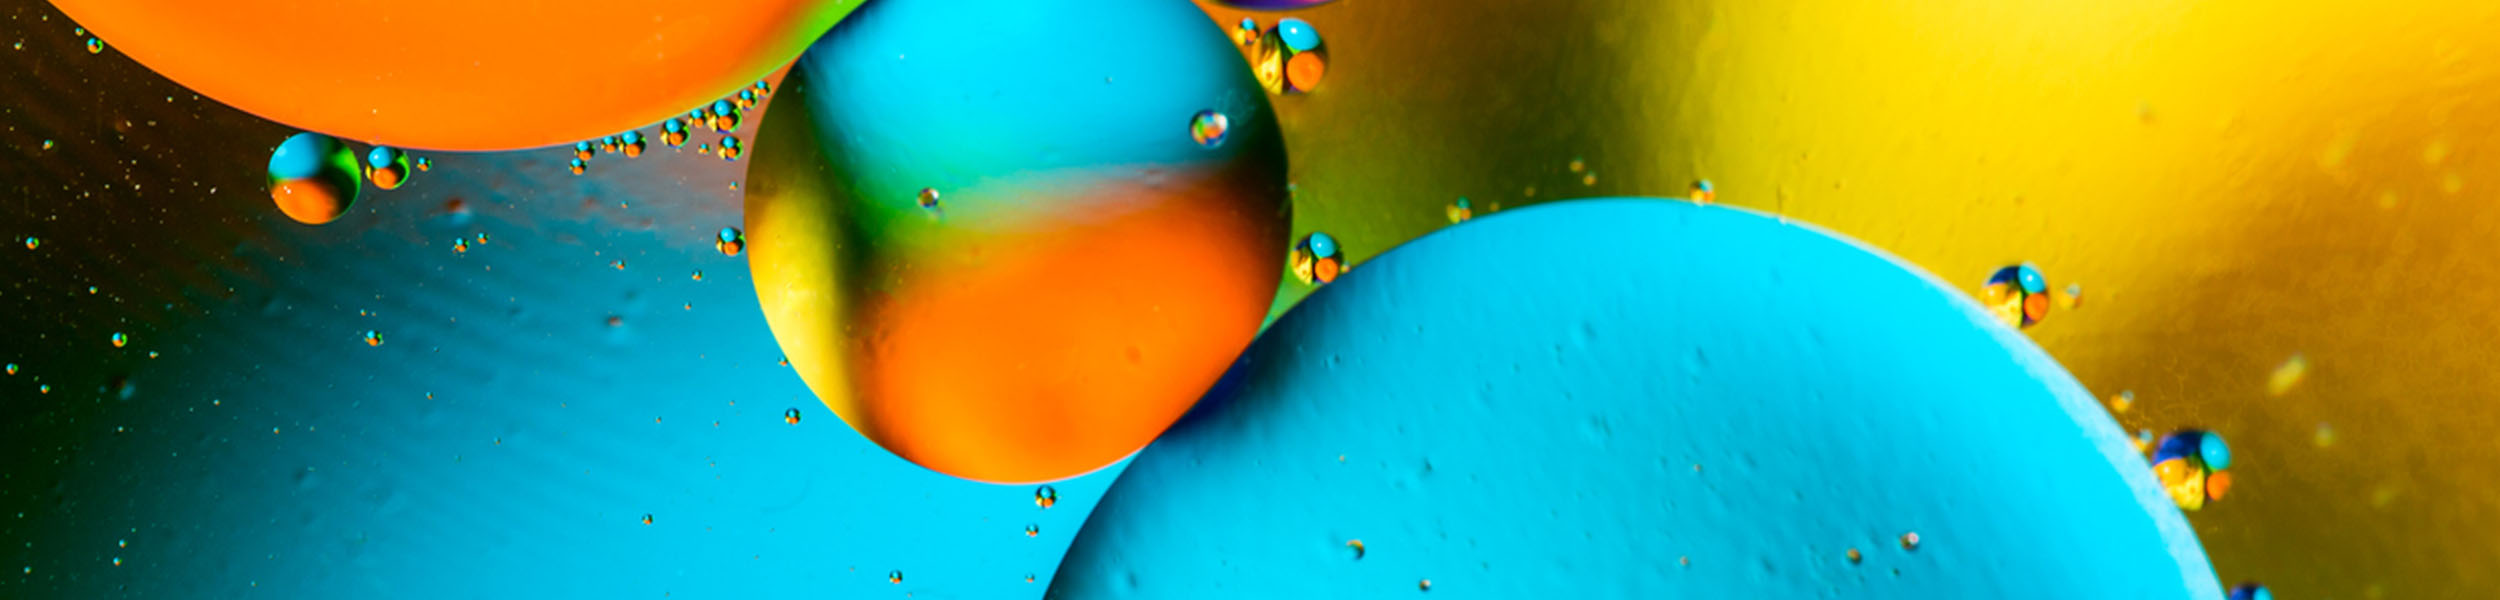 colorful spheres